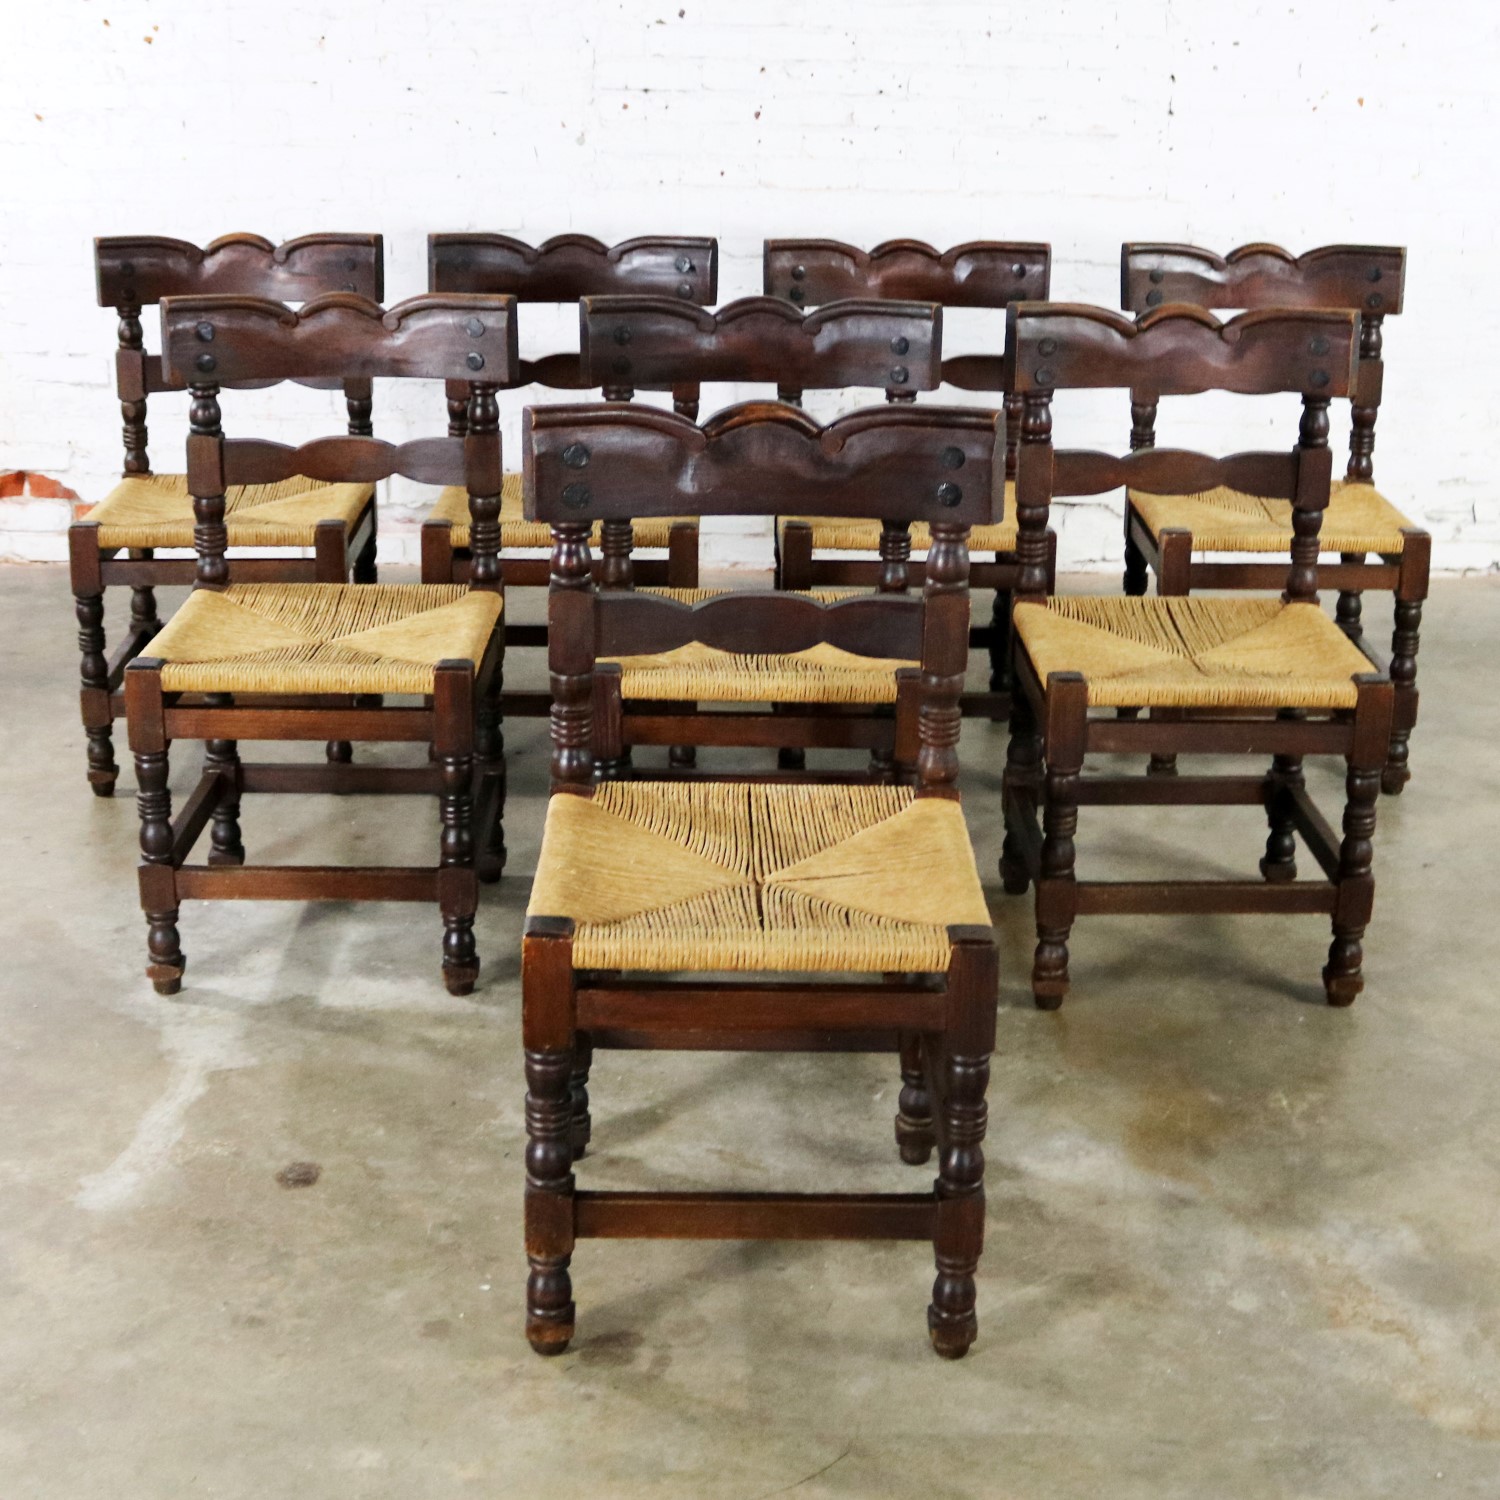 Spanish Colonial Style Dining Chairs with Rush Seats Stamped Hecho en Mexico